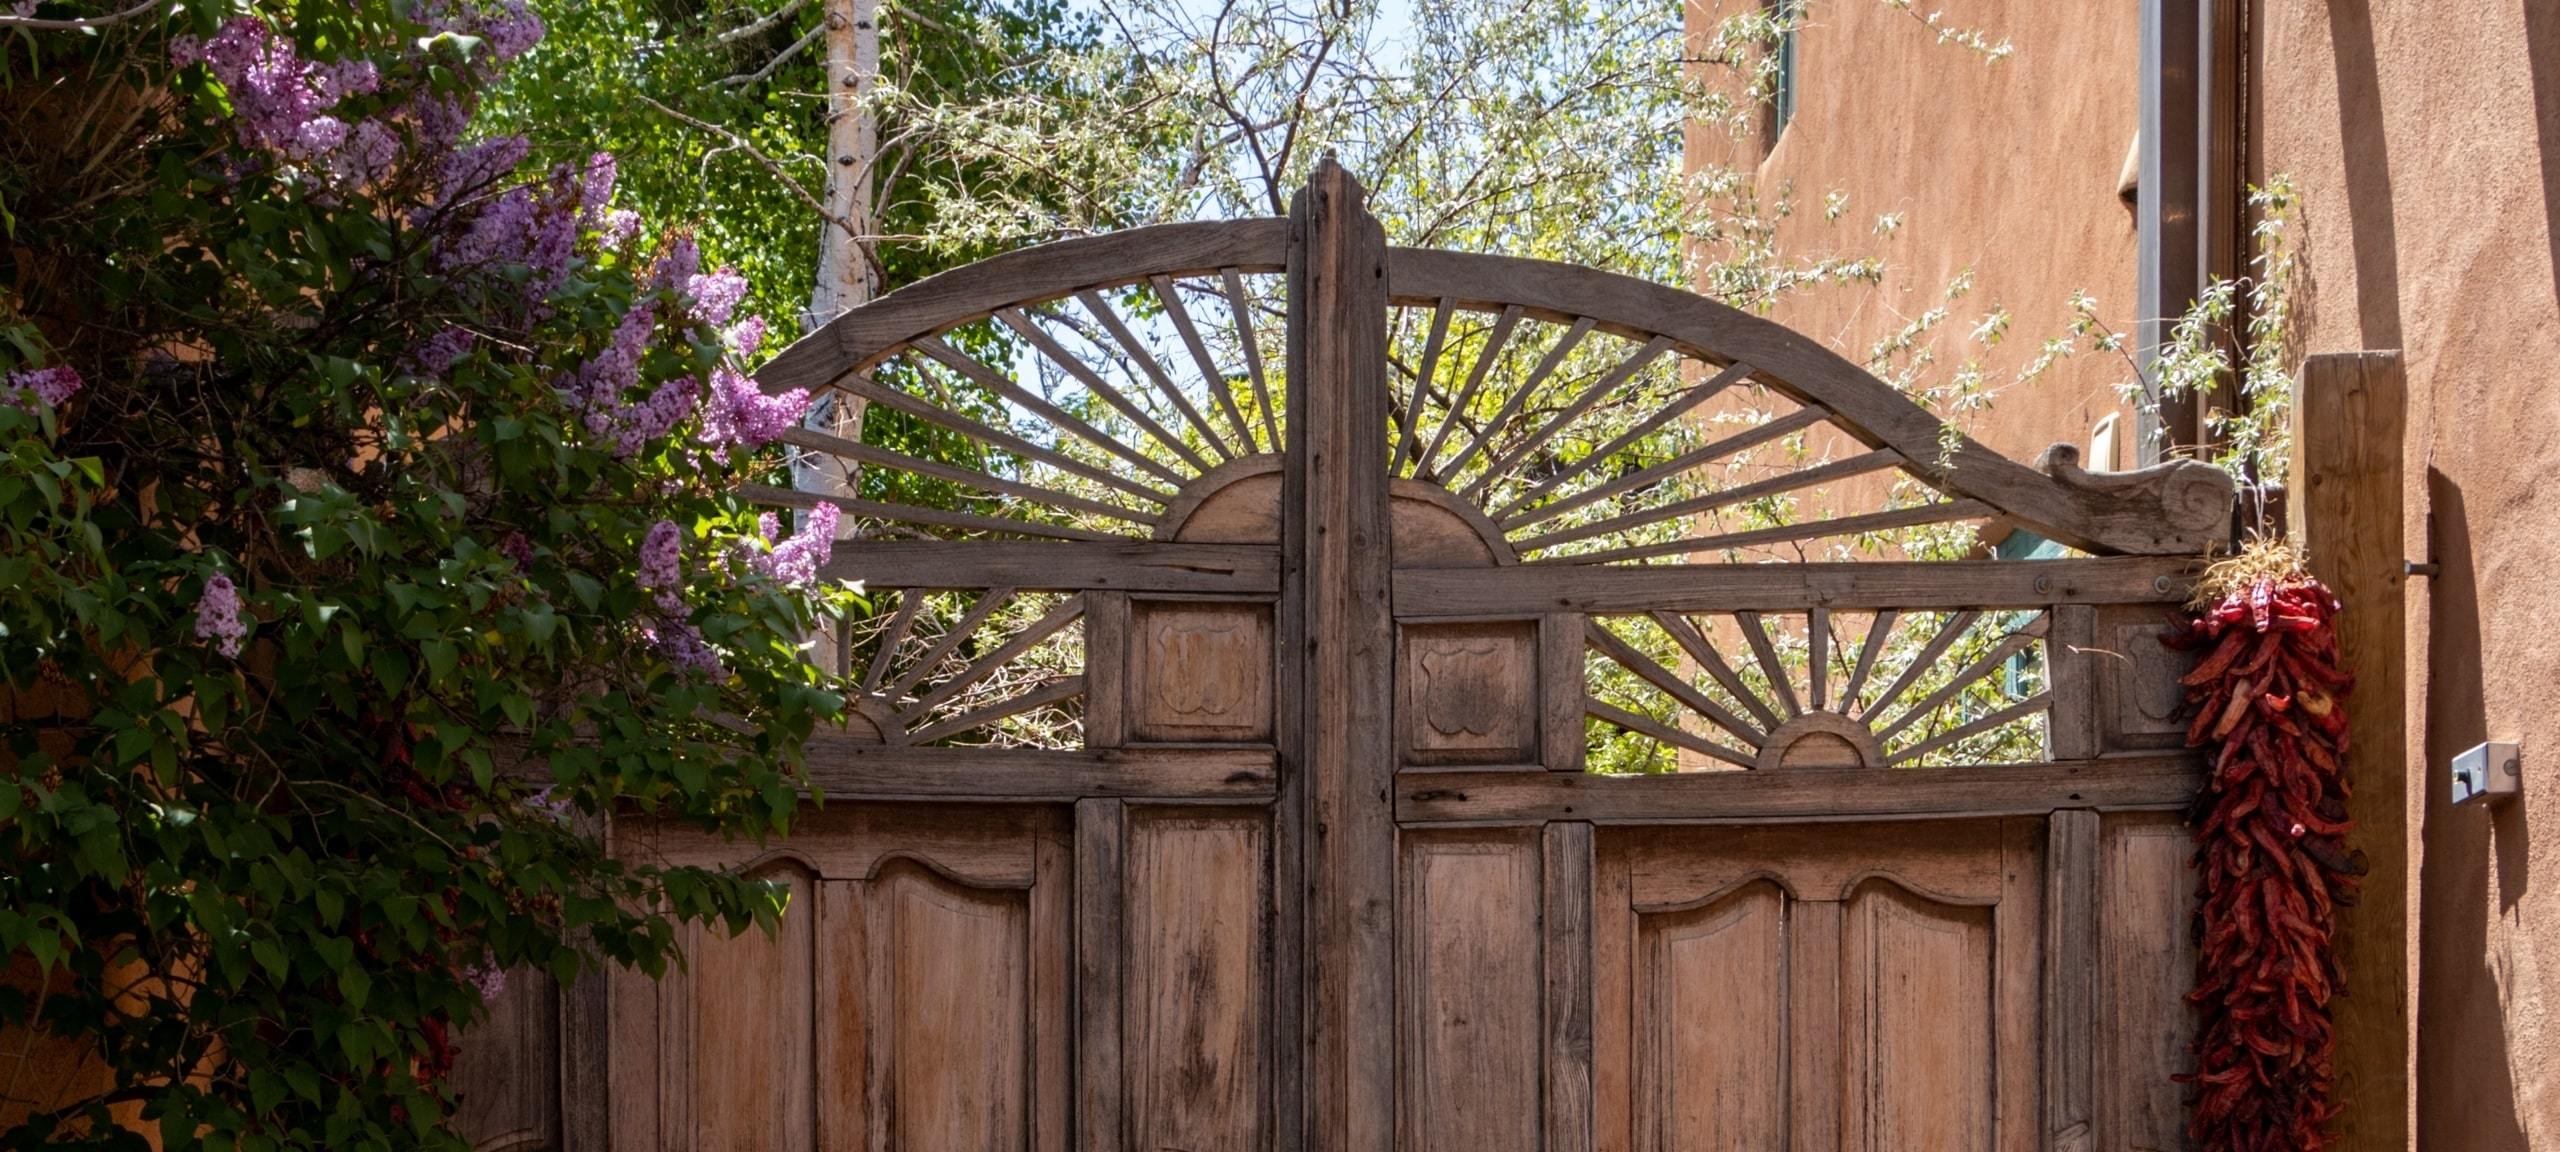 Wooden gate and flowers outside Santa Fe home